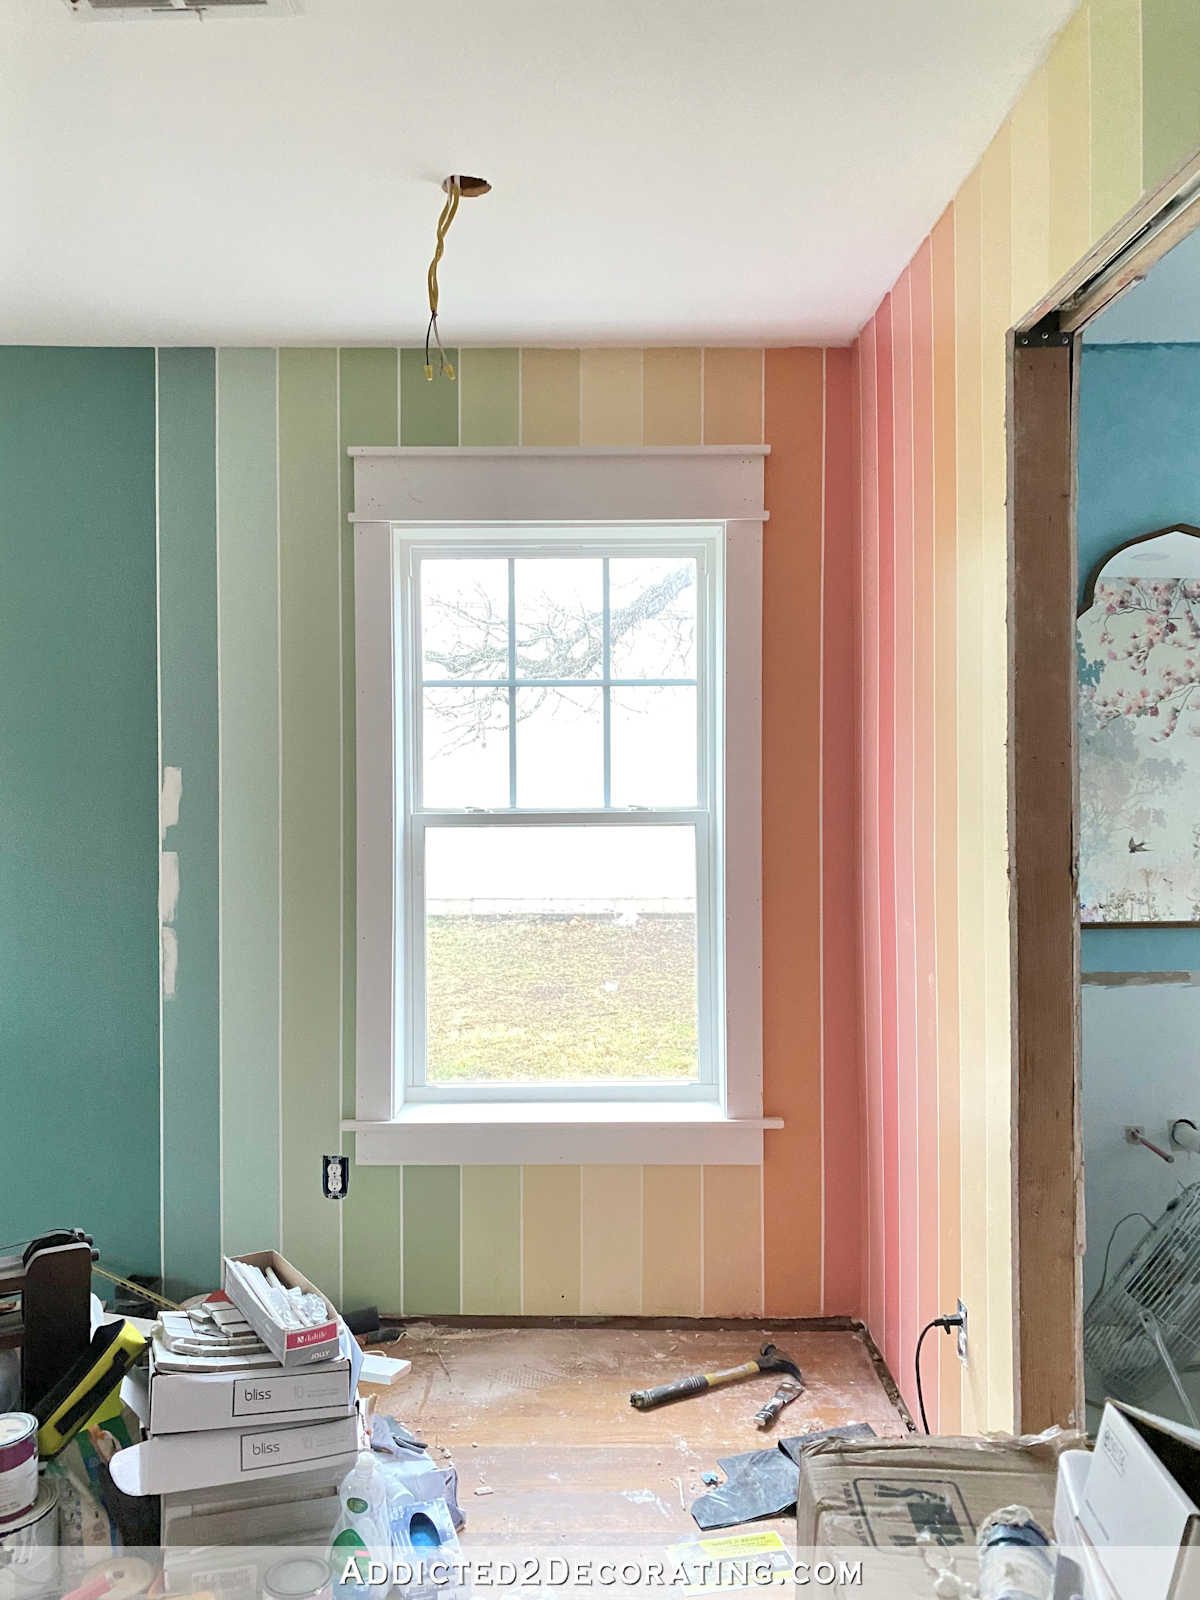 vertical striped rainbow walls with white trim on windows